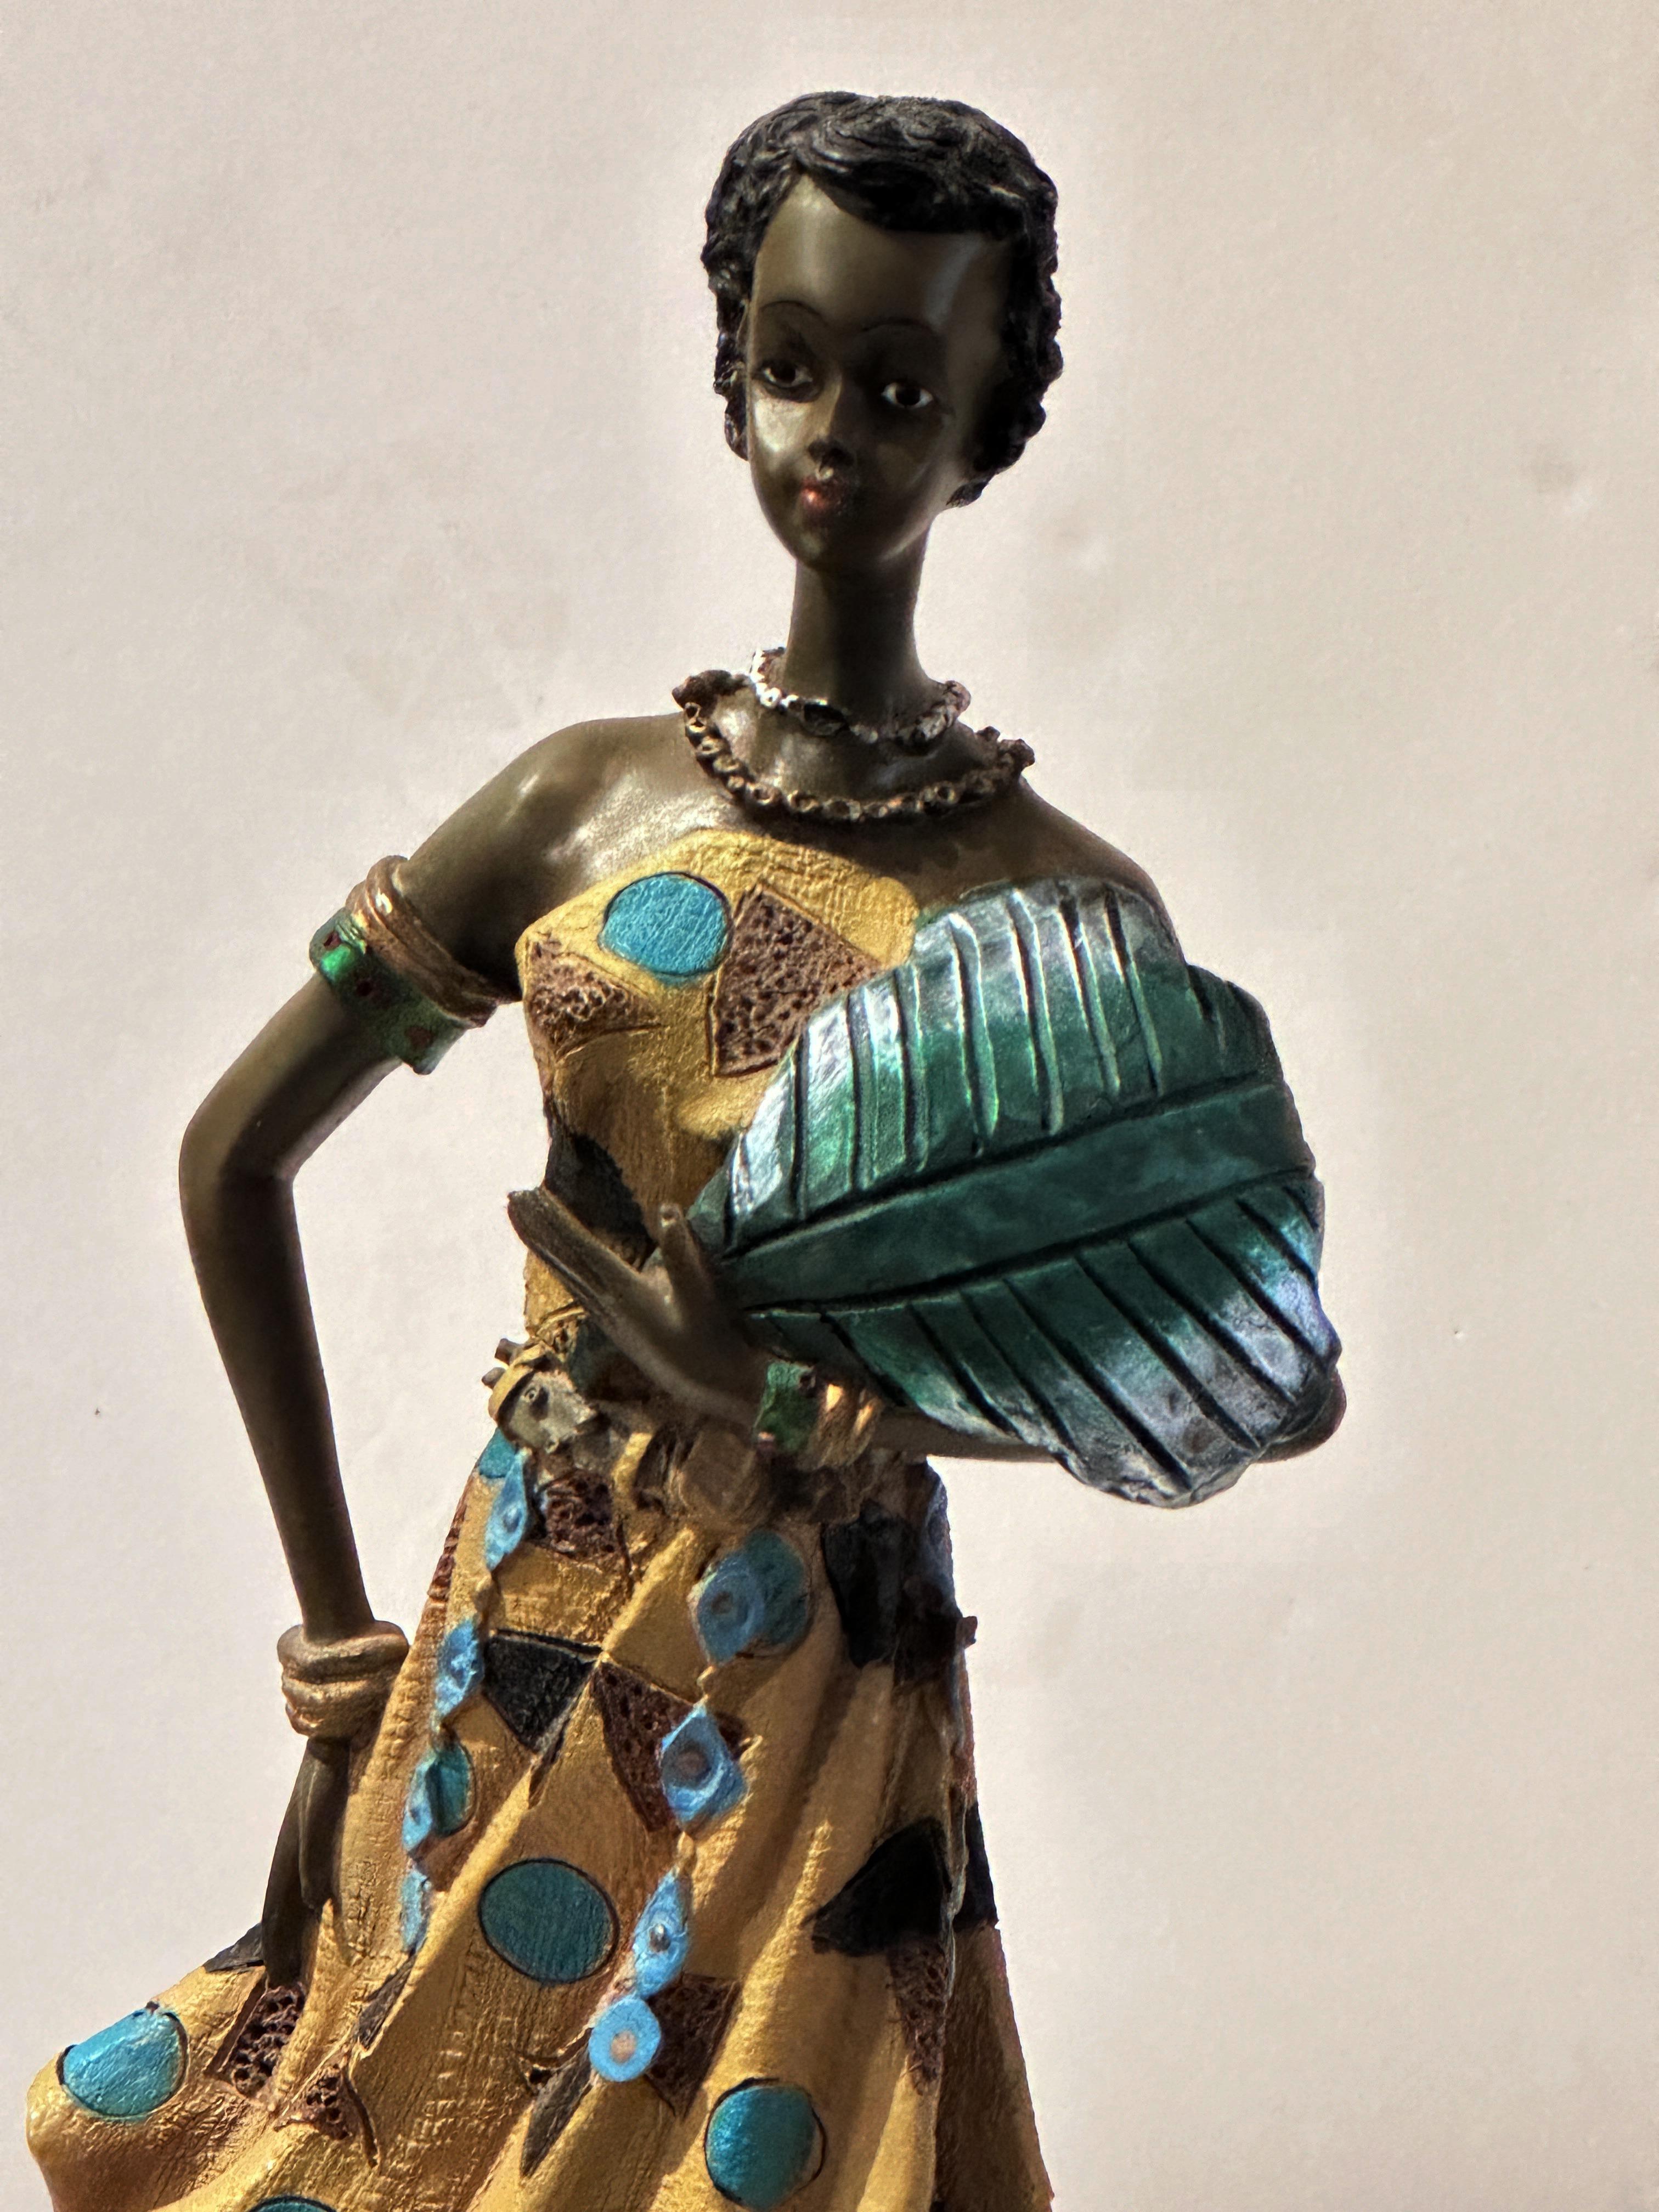 This African figure sculpture, posing with her large leaf fan, could be titled 